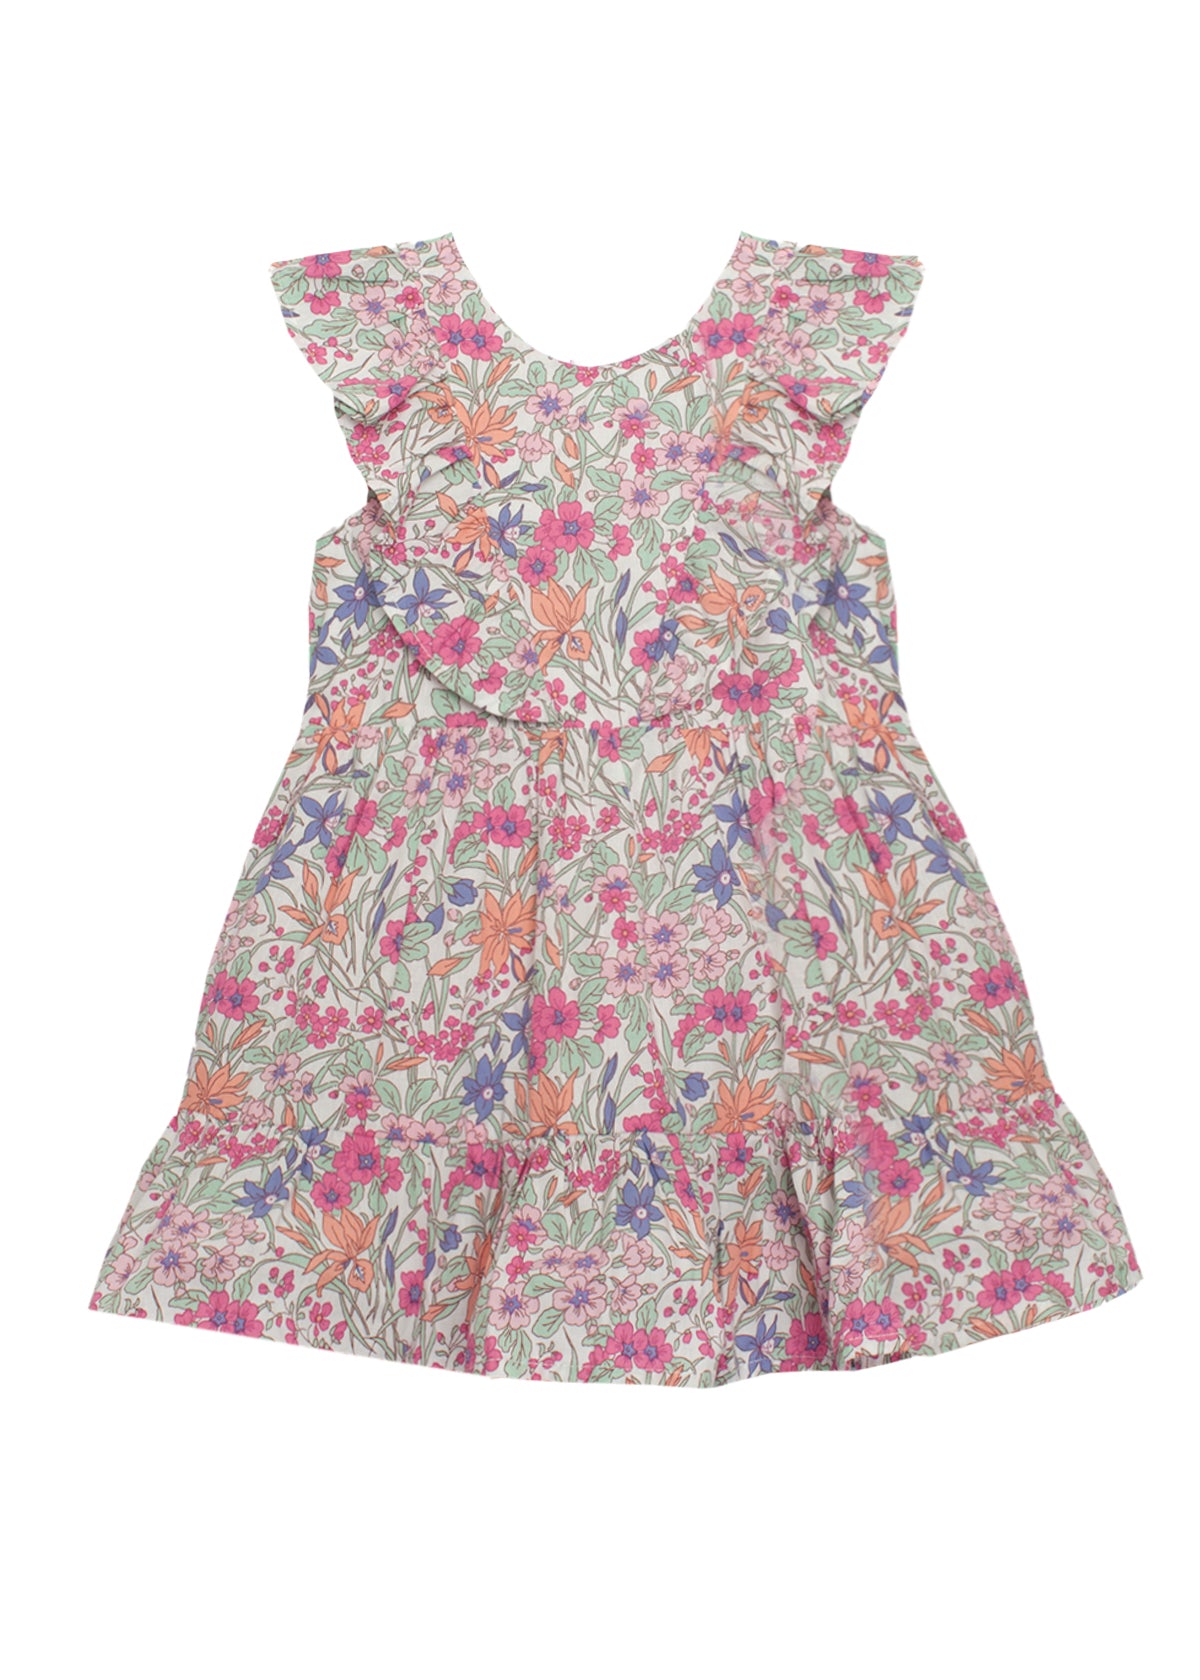 Floral Ophilia Dress